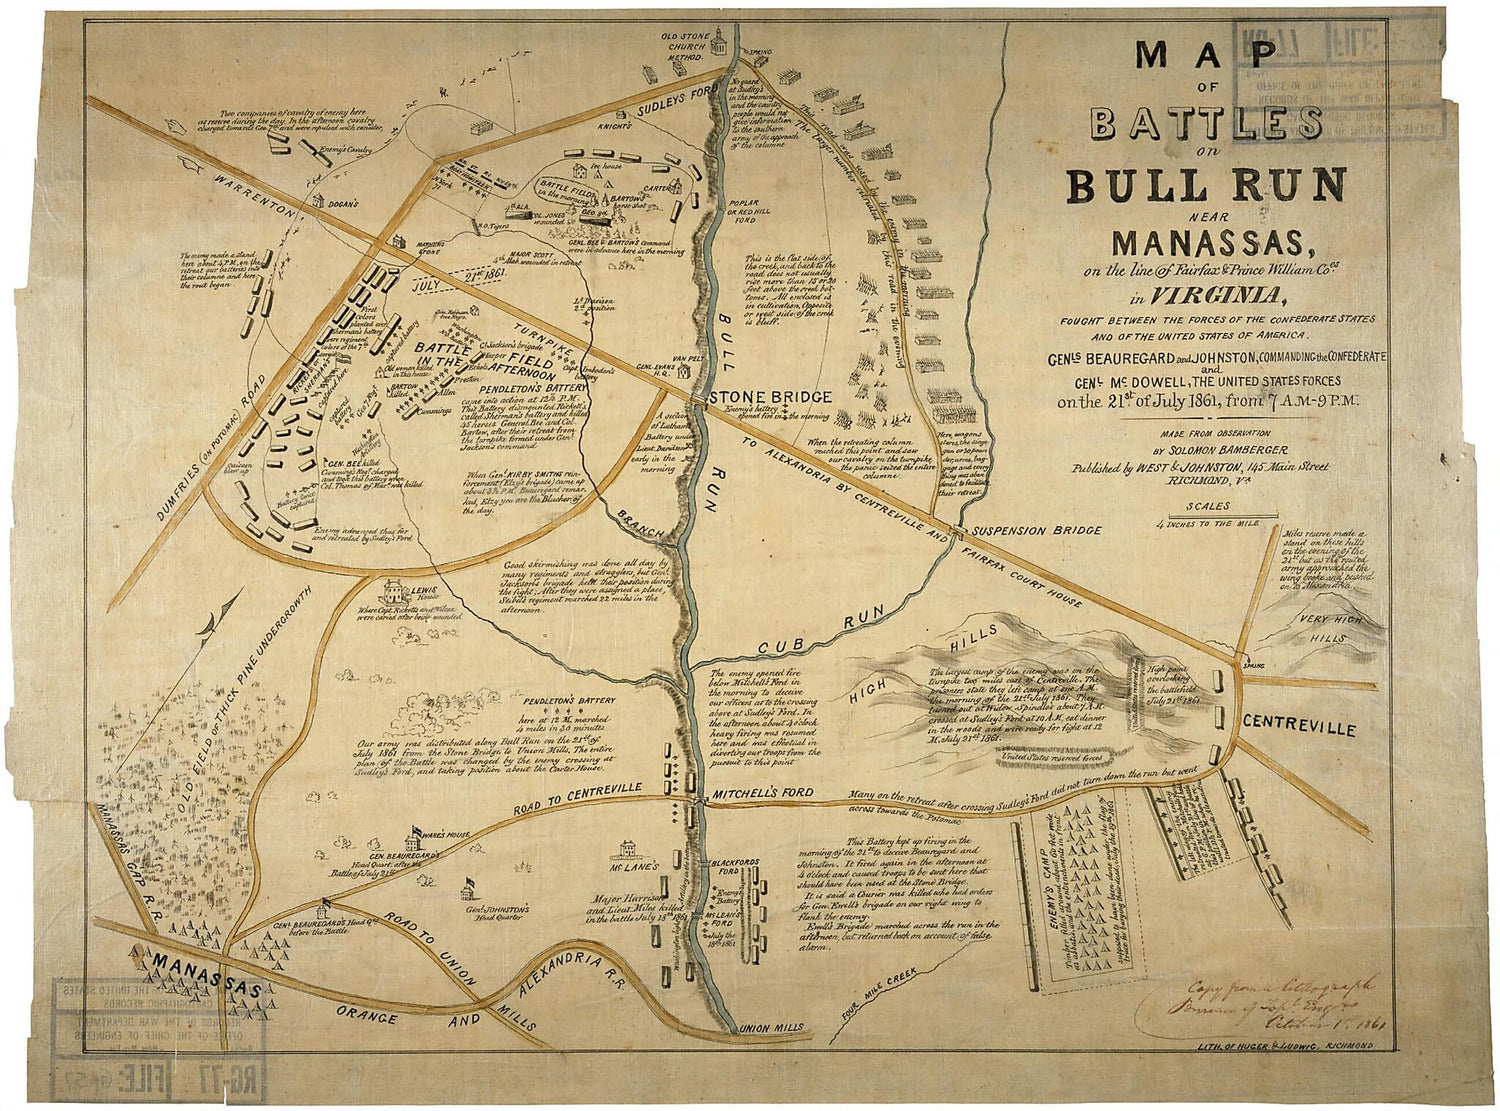 This old map of Map of the Battles of Bull Run Near Manassas from 1861 was created by Solomon Bamberger in 1861